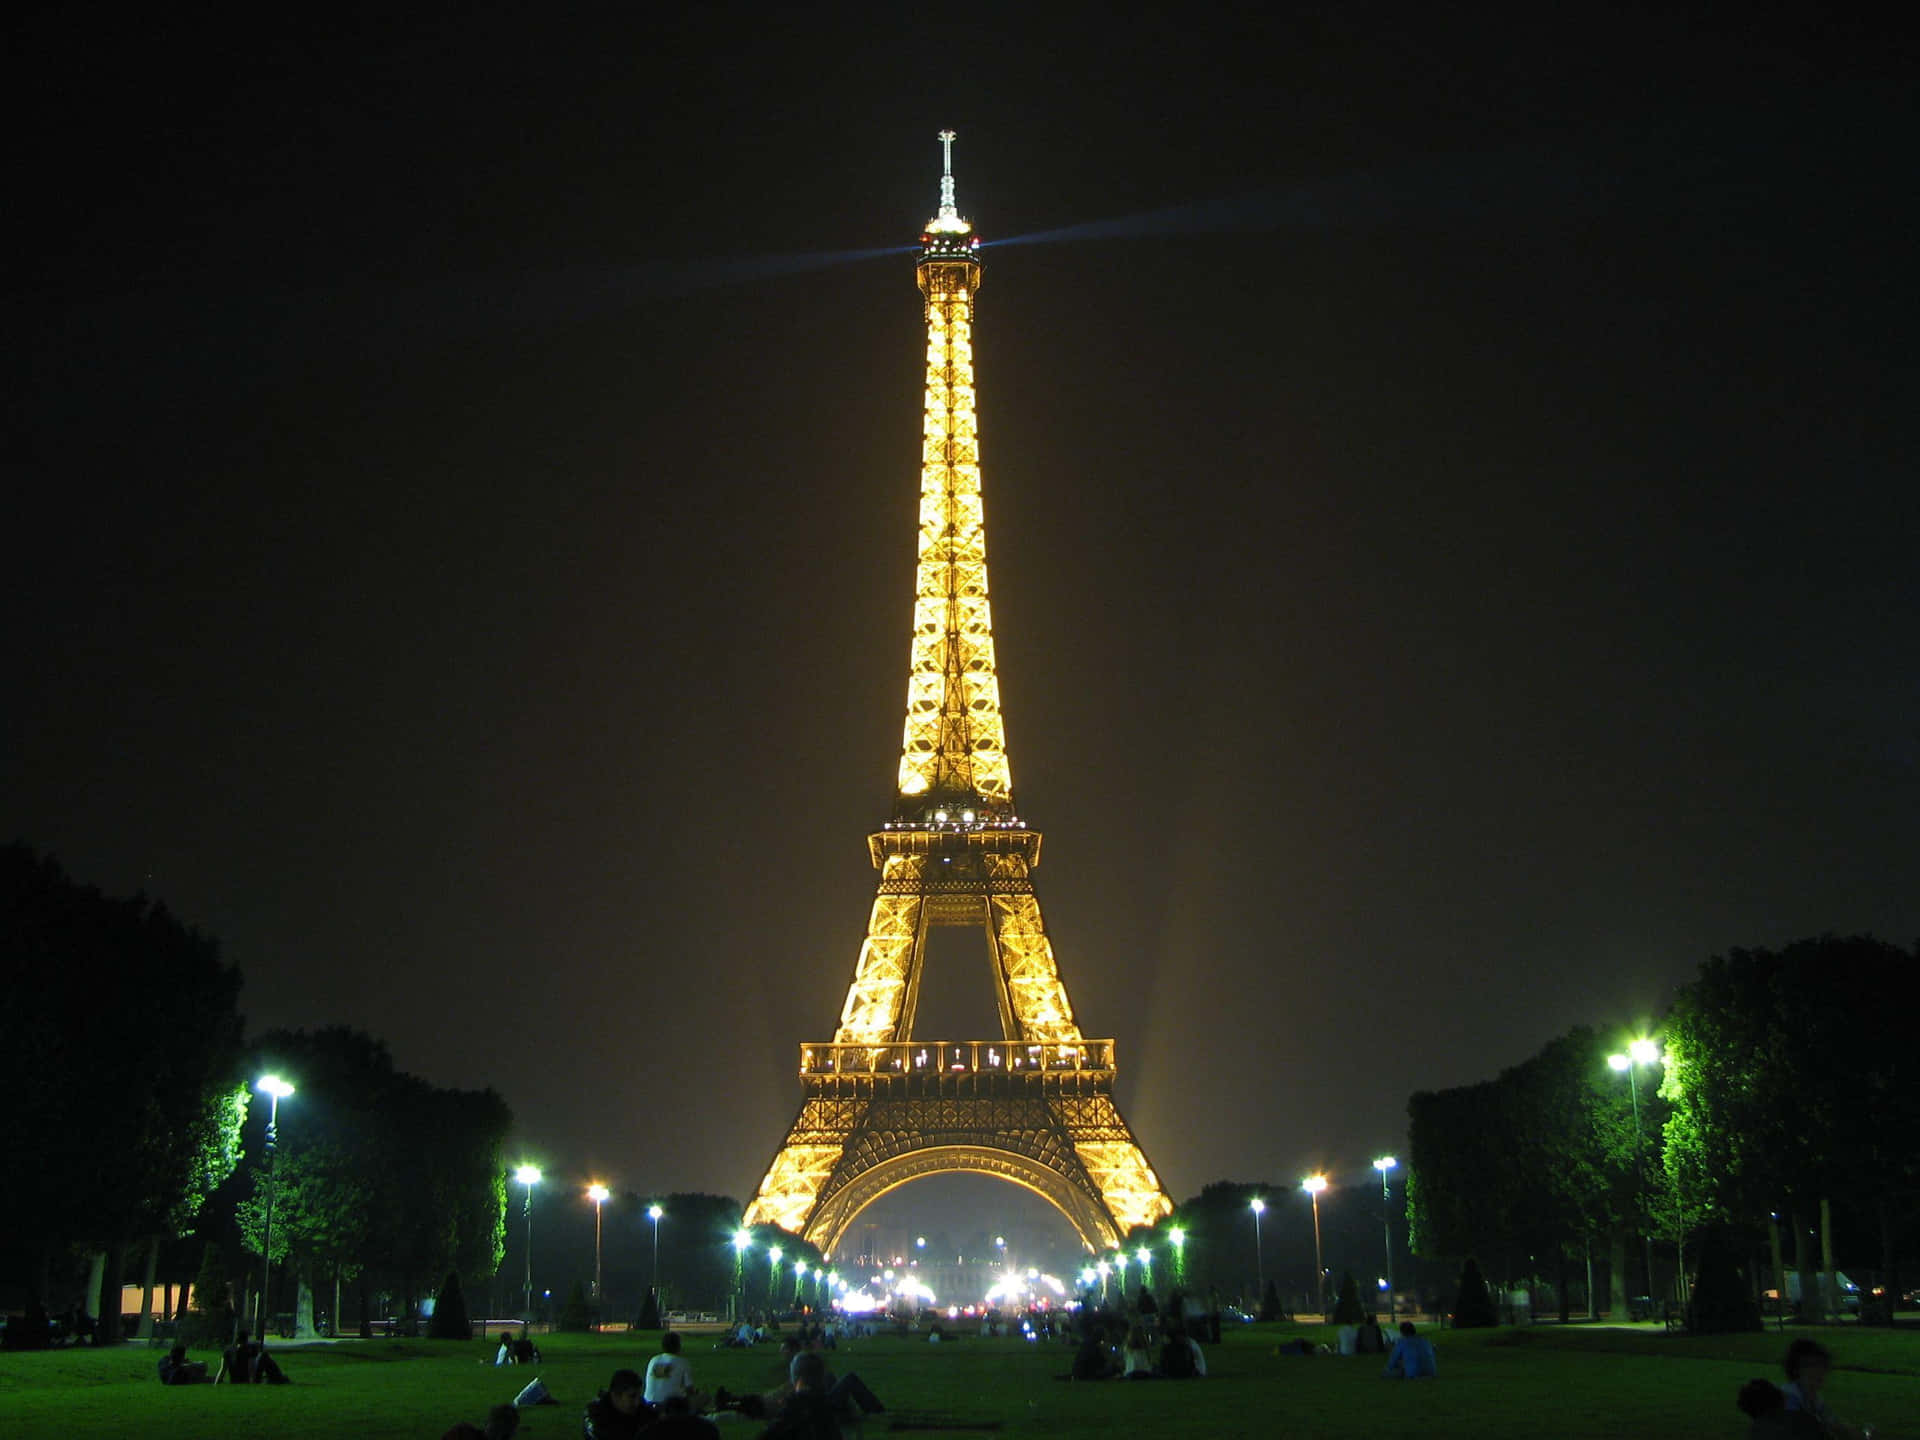 The Eiffel Tower at night with twinkling lights